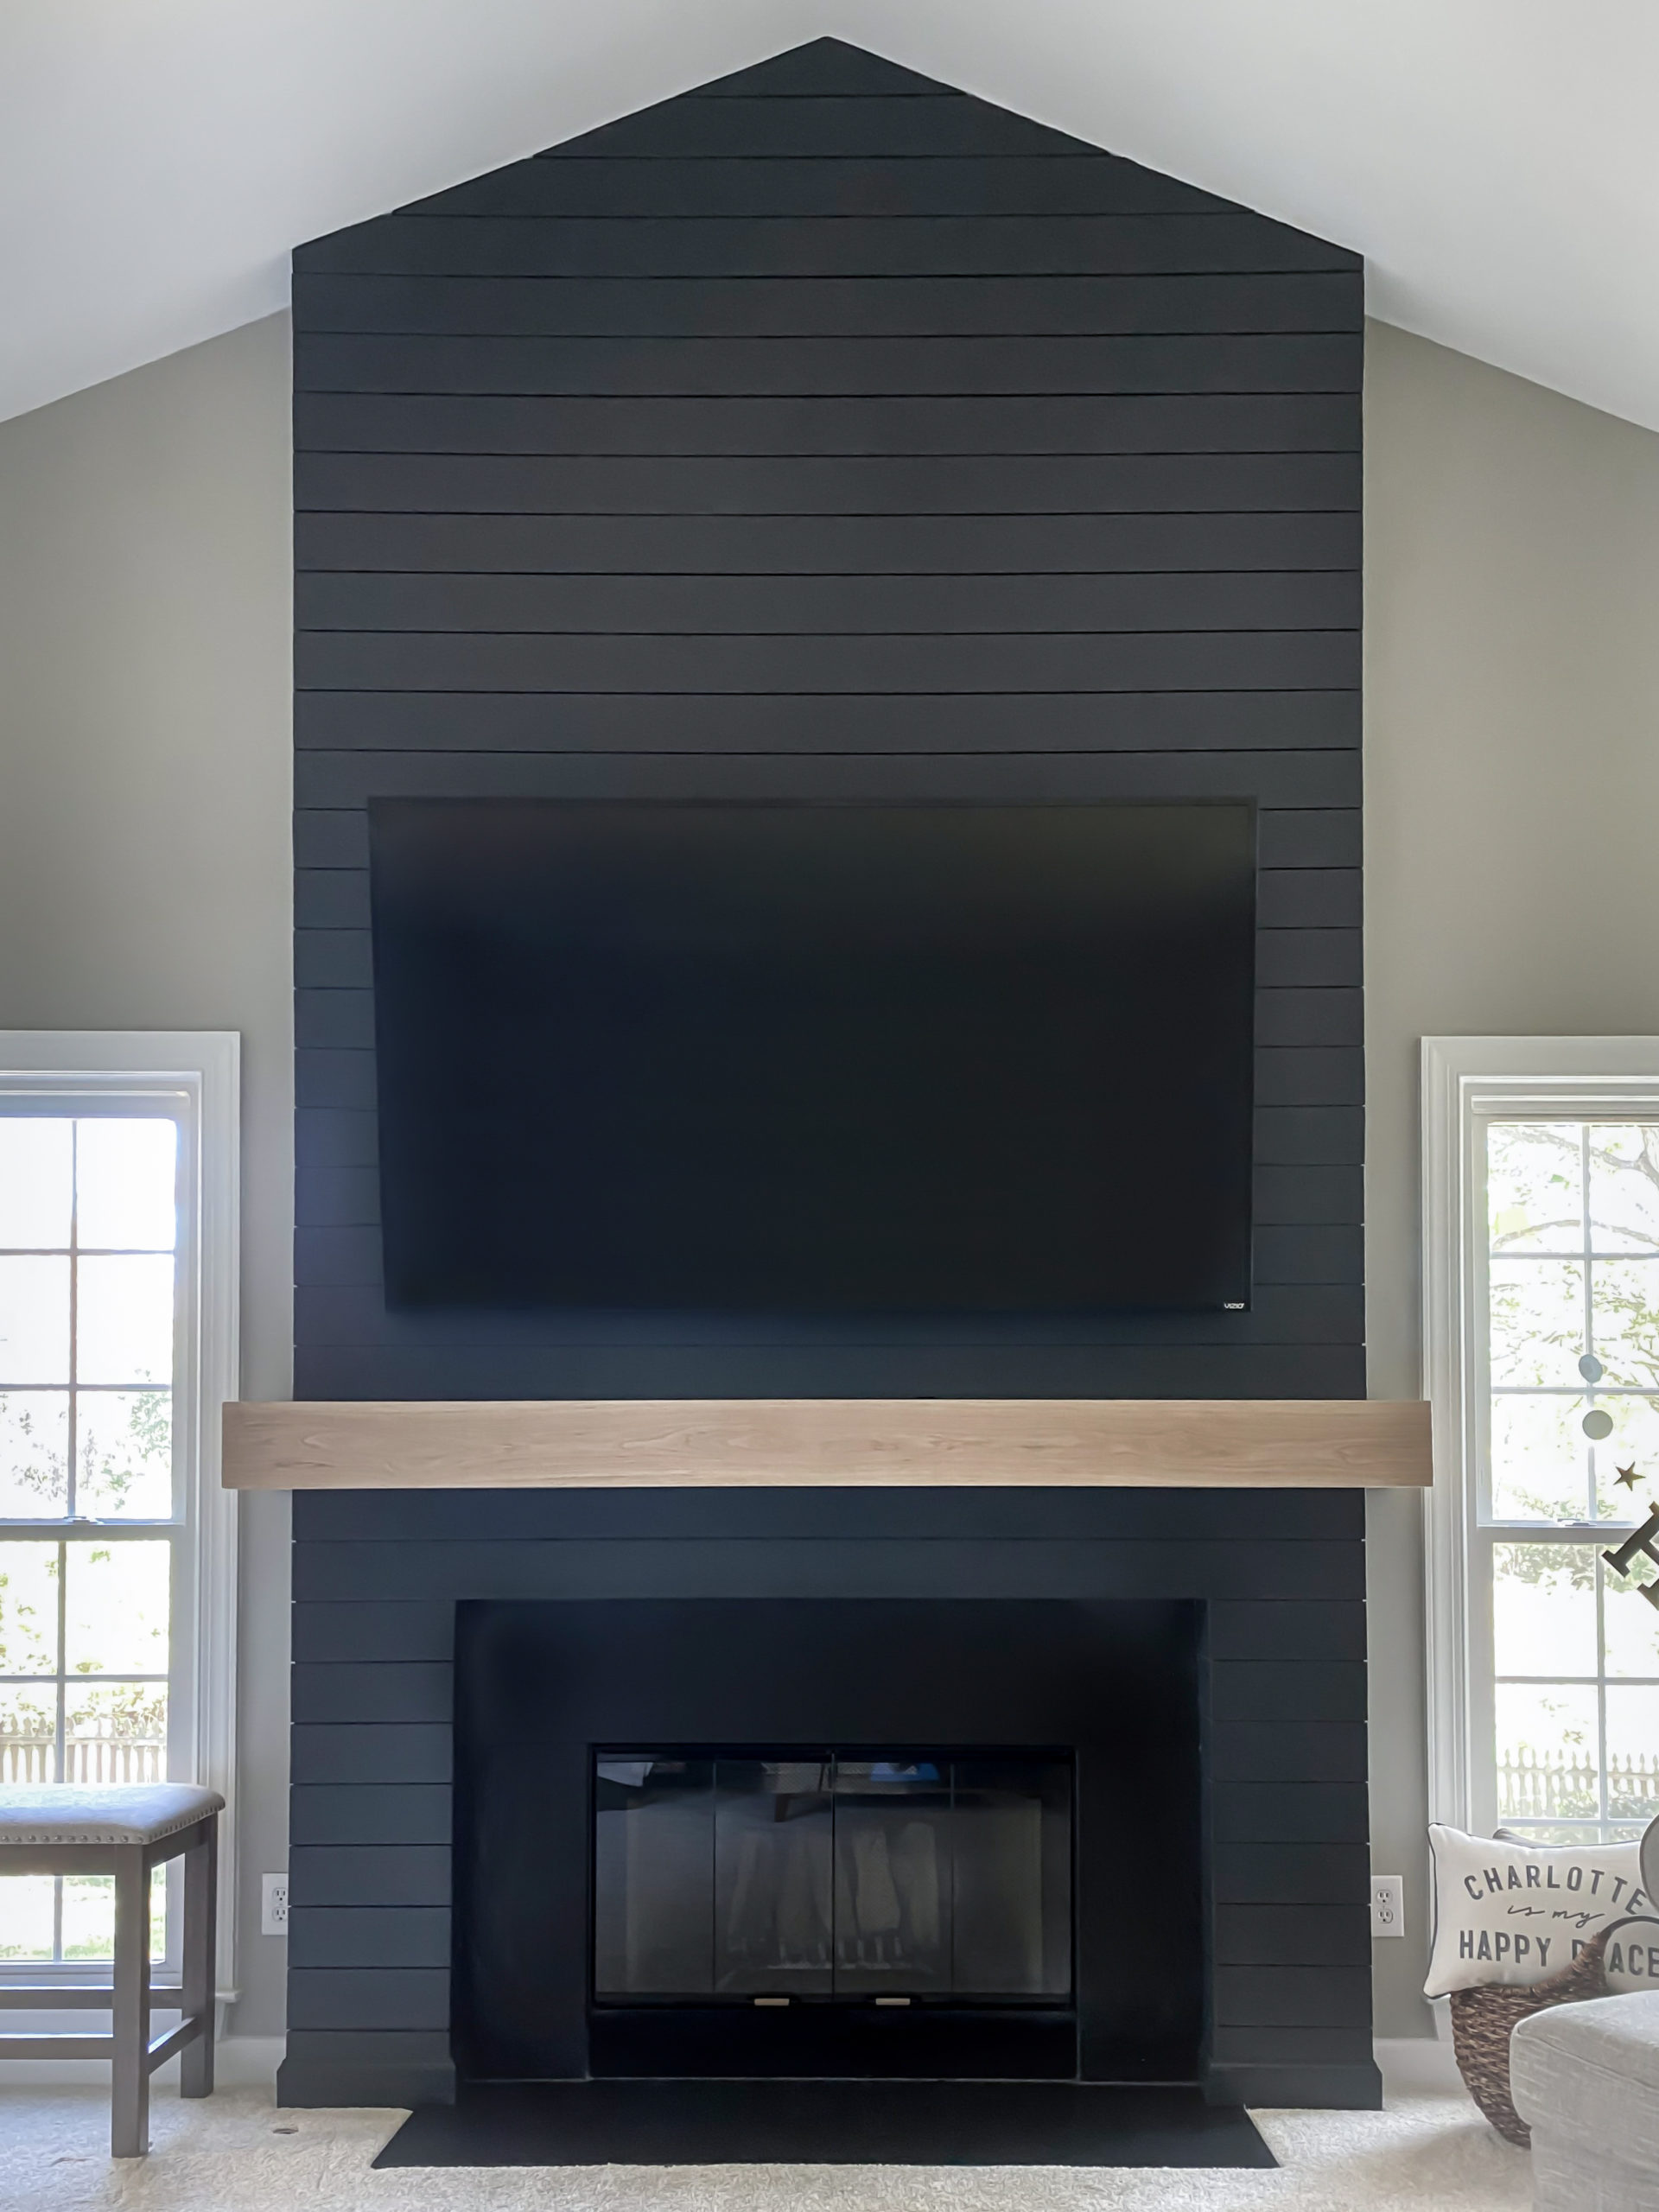 DIY Modern Shiplap Fireplace painted in a dark blue with a white oak mantel.